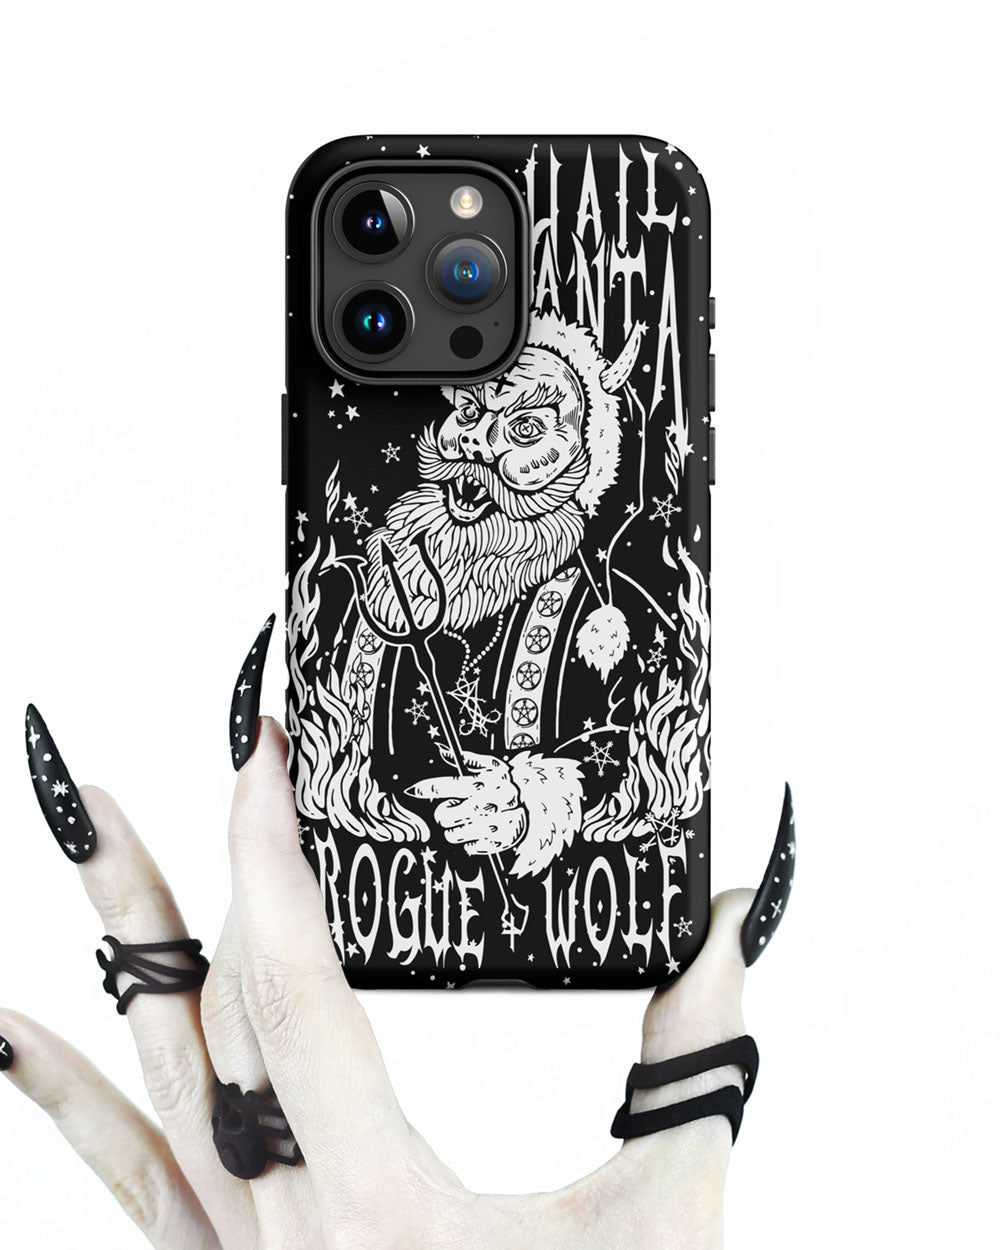 Hail Santa Tough Phone Case for iPhone - Xmas Witchy Shockproof Anti-scratch Goth Cover Gothic Christmas Gifts